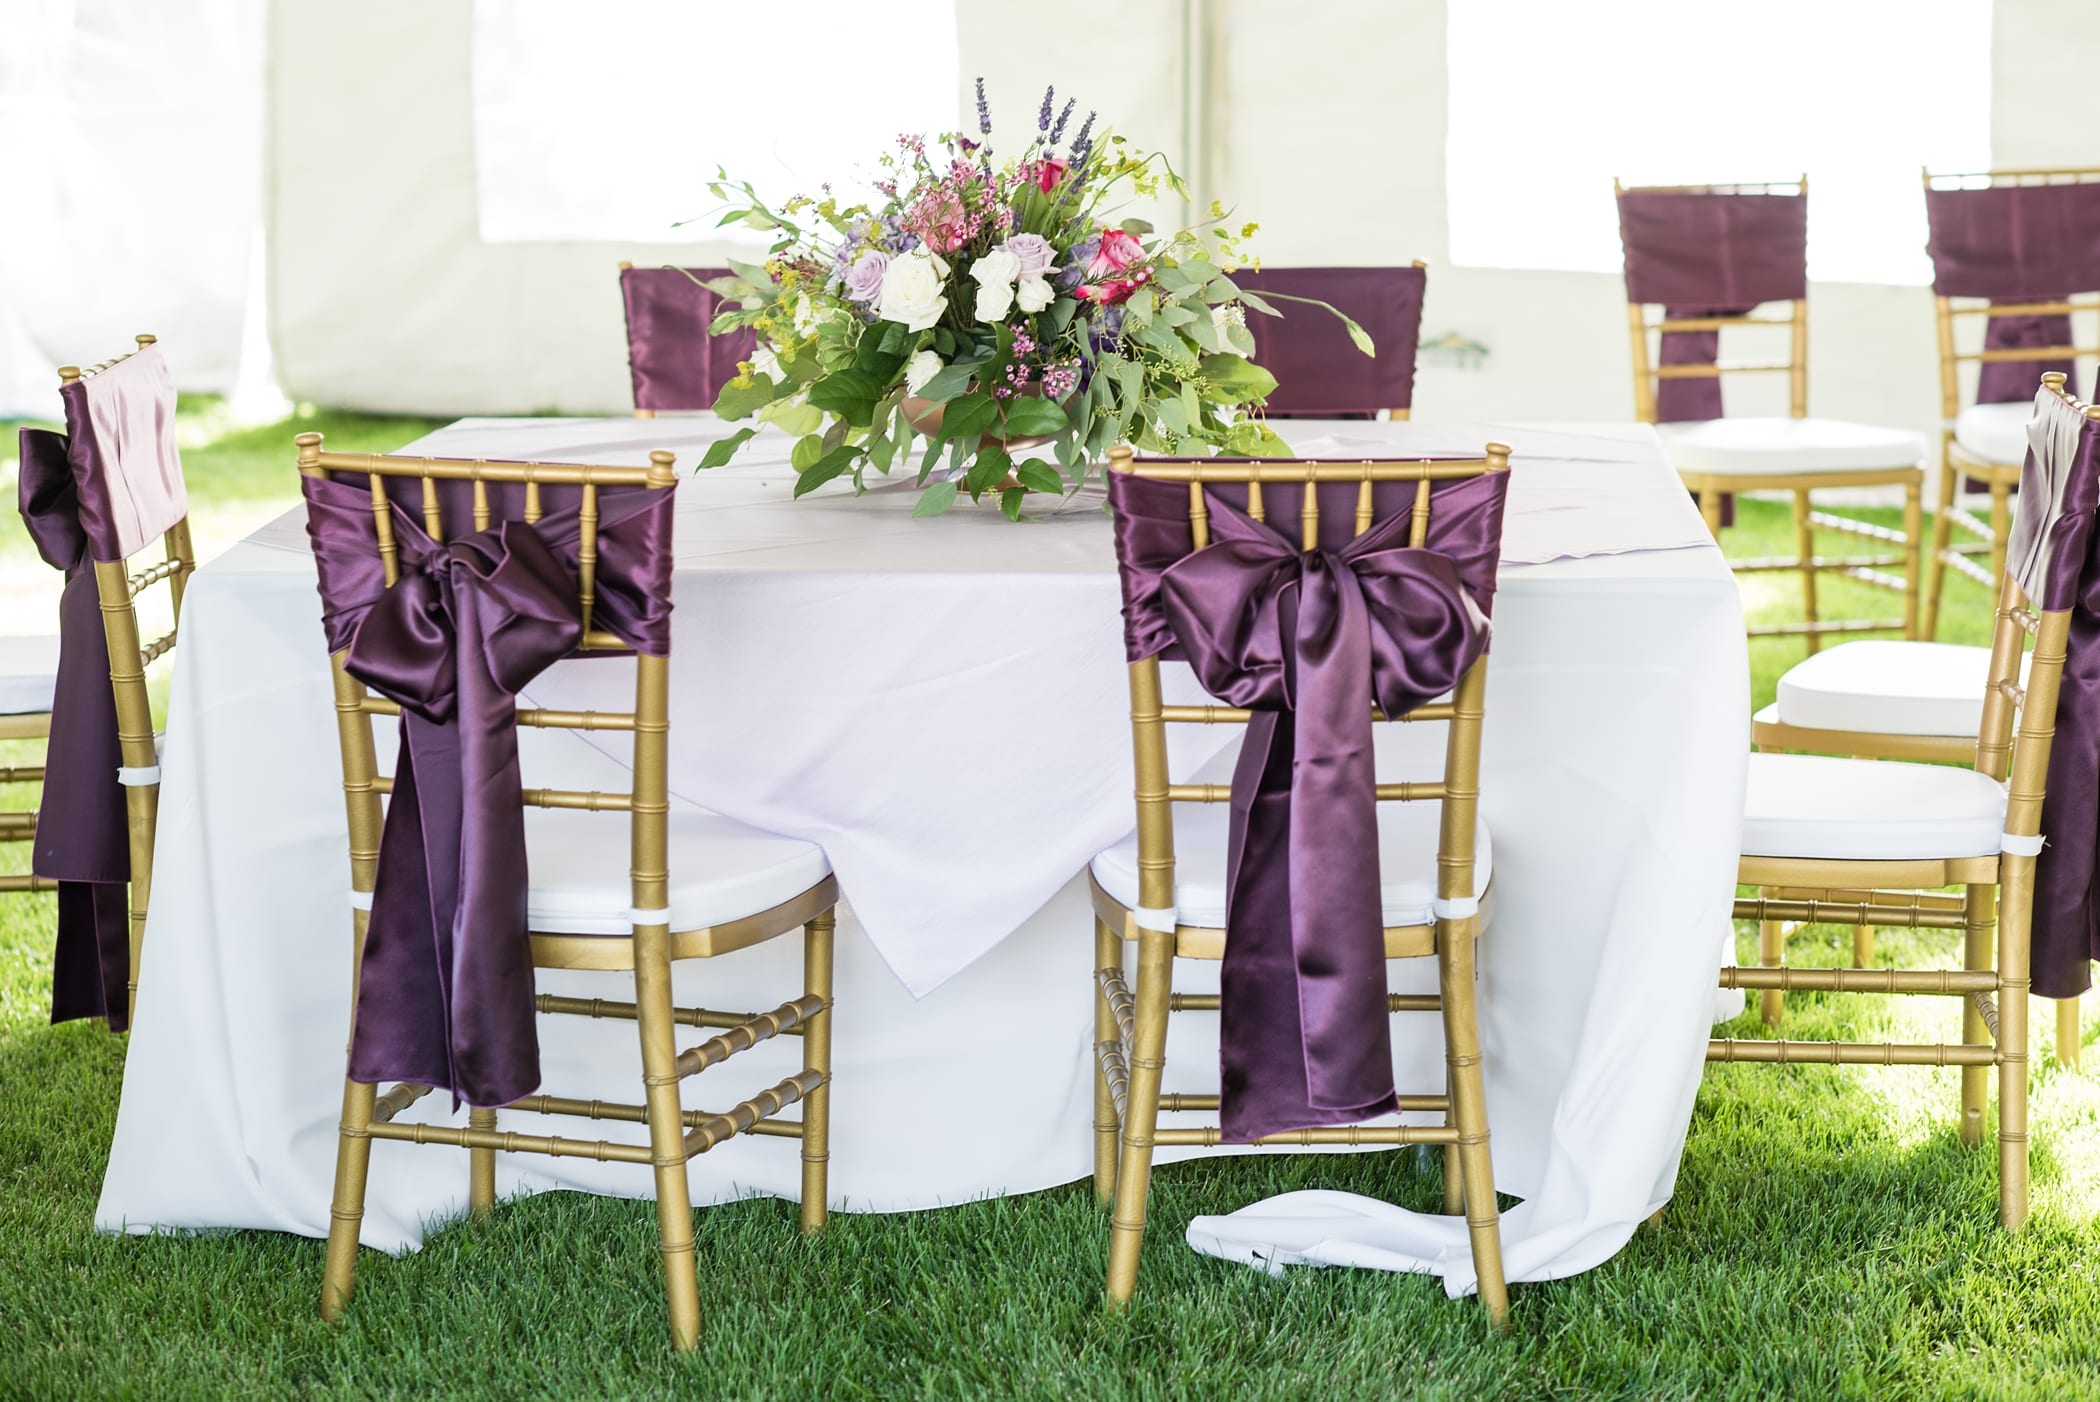 Purple and Gold Outdoor Tented Reception Idaho Falls by Michelle & Logan